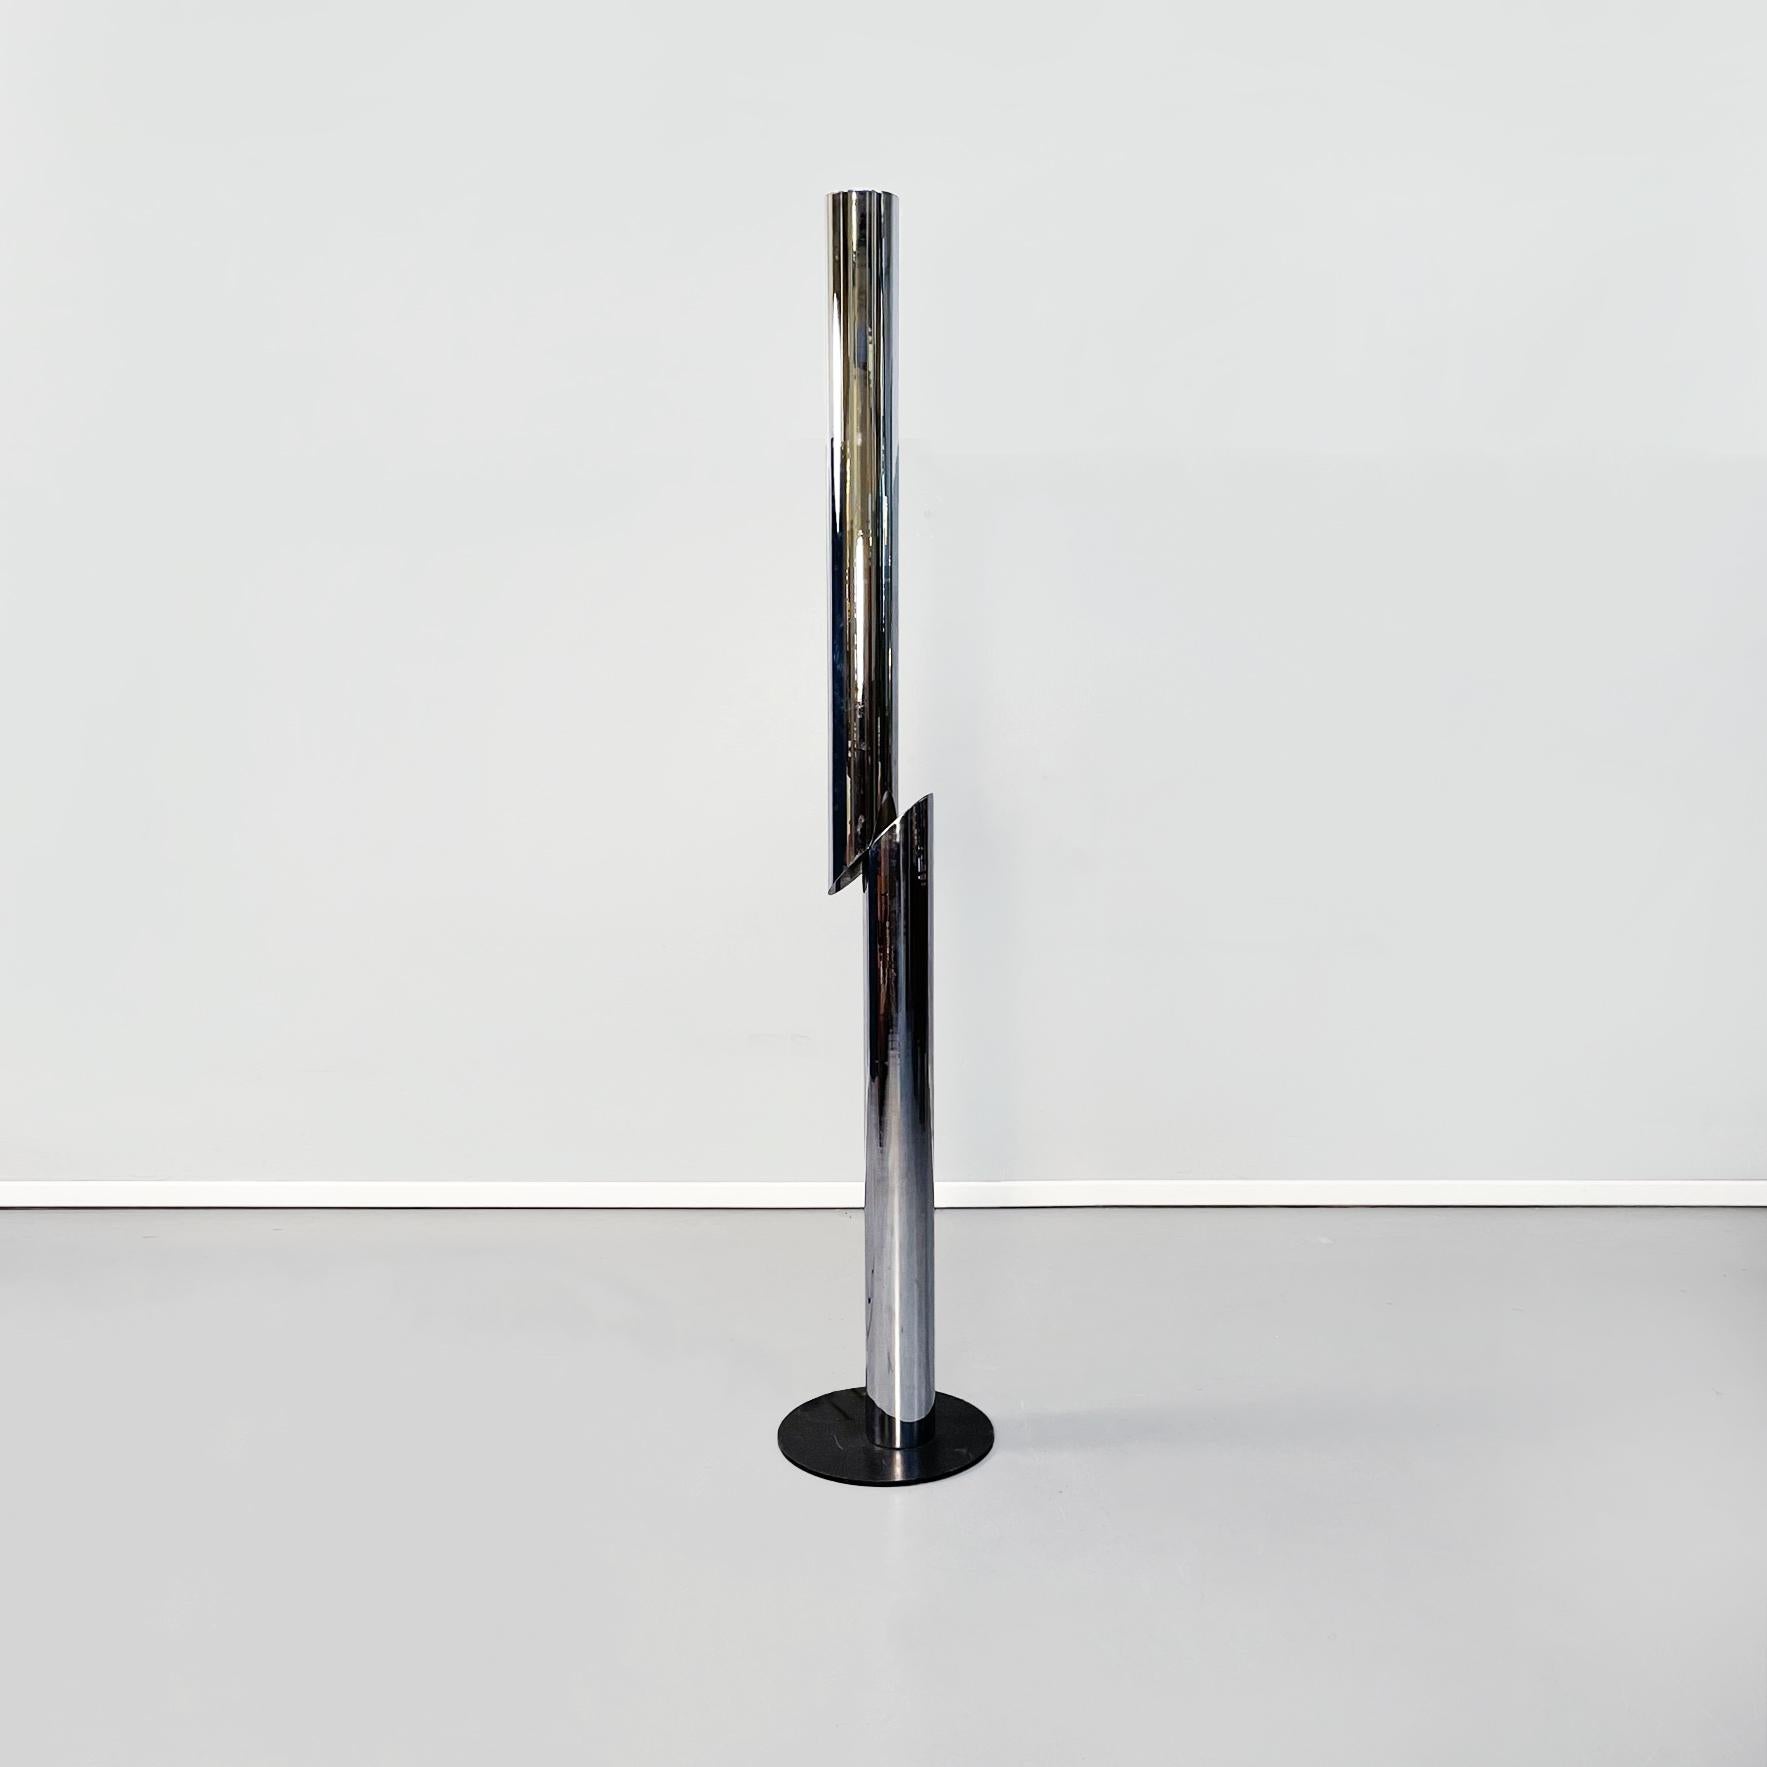 Italian Cicindela floor lamp by Cortesi Chiappa-Cattó Forme e Superfici, 1970s
Cicindela floor lamp with a cylindrical shape broken in the middle in lacquered and chromed metal. The light is placed in the central cut. The base is round in black